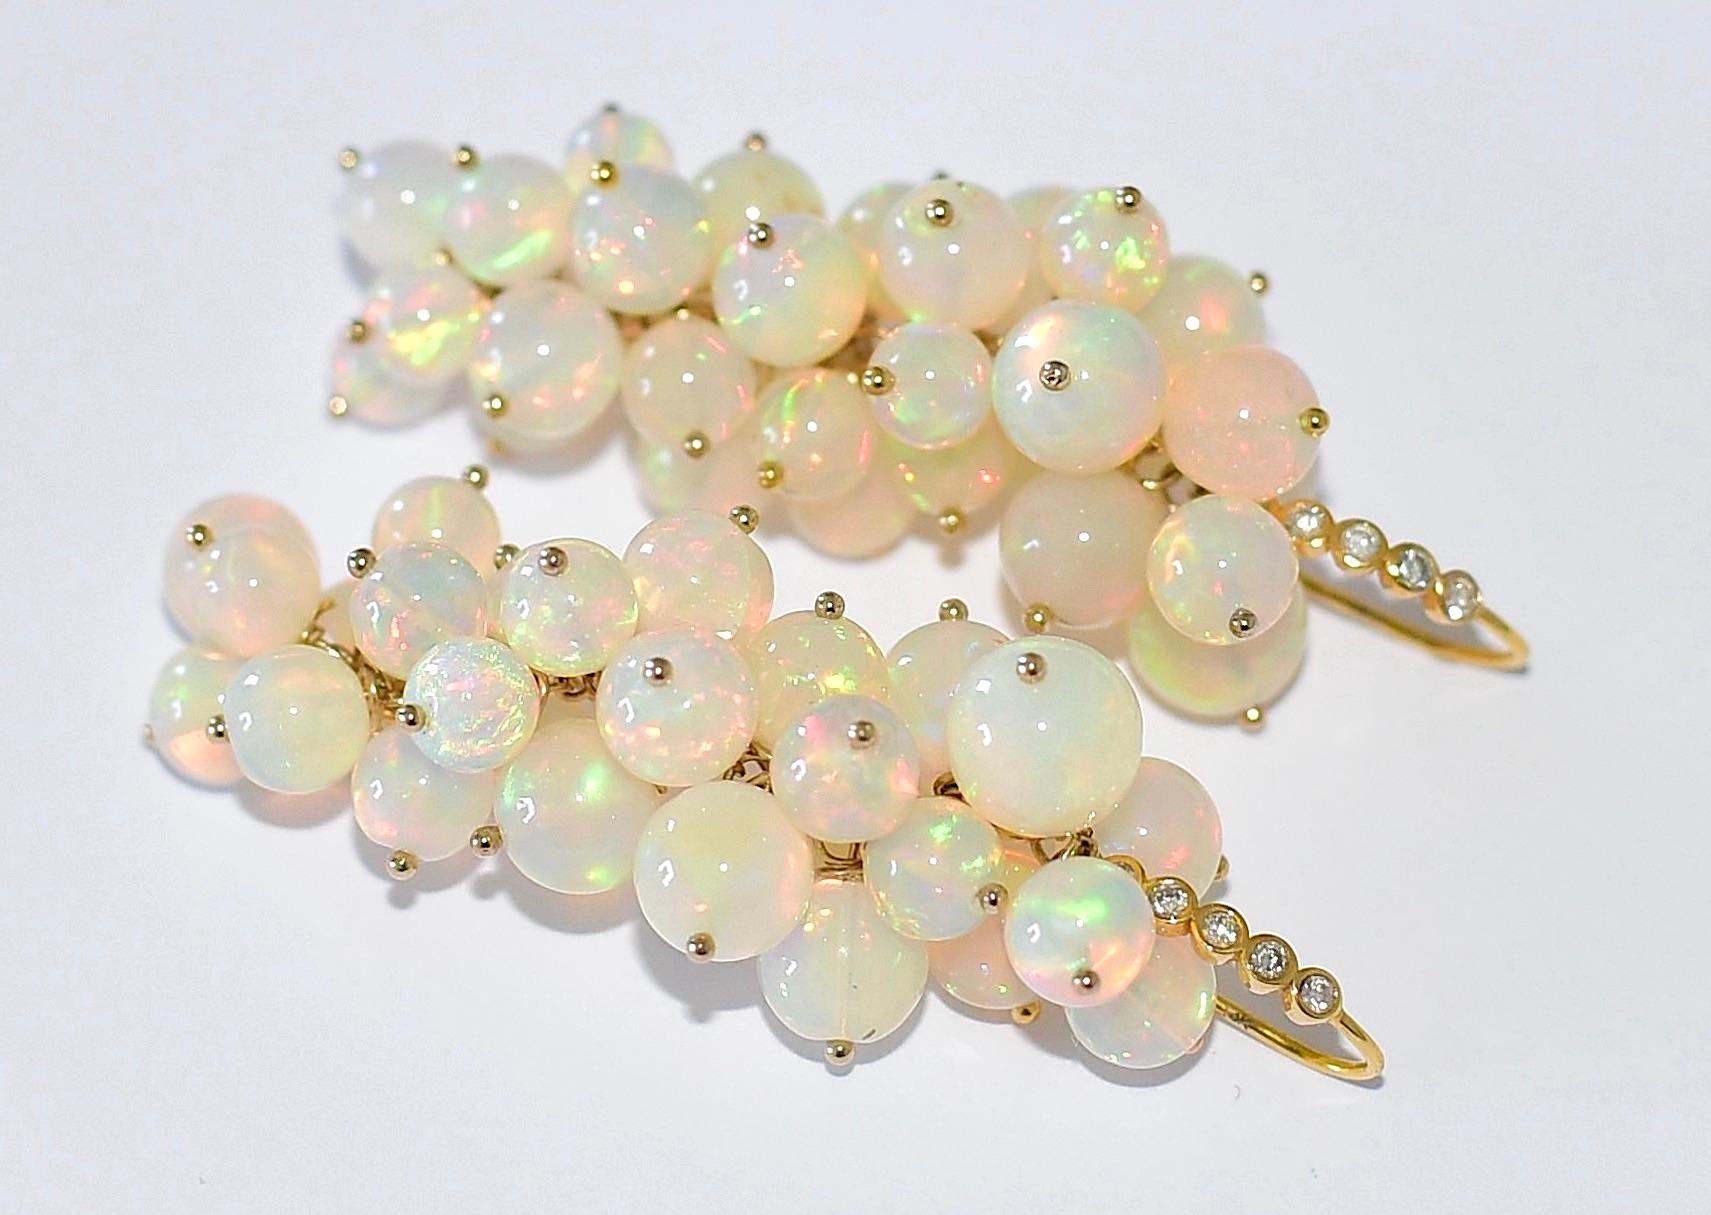 Wonderful, unique, and like a bunch of white juicy berries! High-end White Ethiopian Opal with a wonderful play of color, extremely rare round shape, and large sizes! (4.8.9mm) approx. 74 carats! Earwire Metal: 14K Solid Yellow Gold
Extraordinary